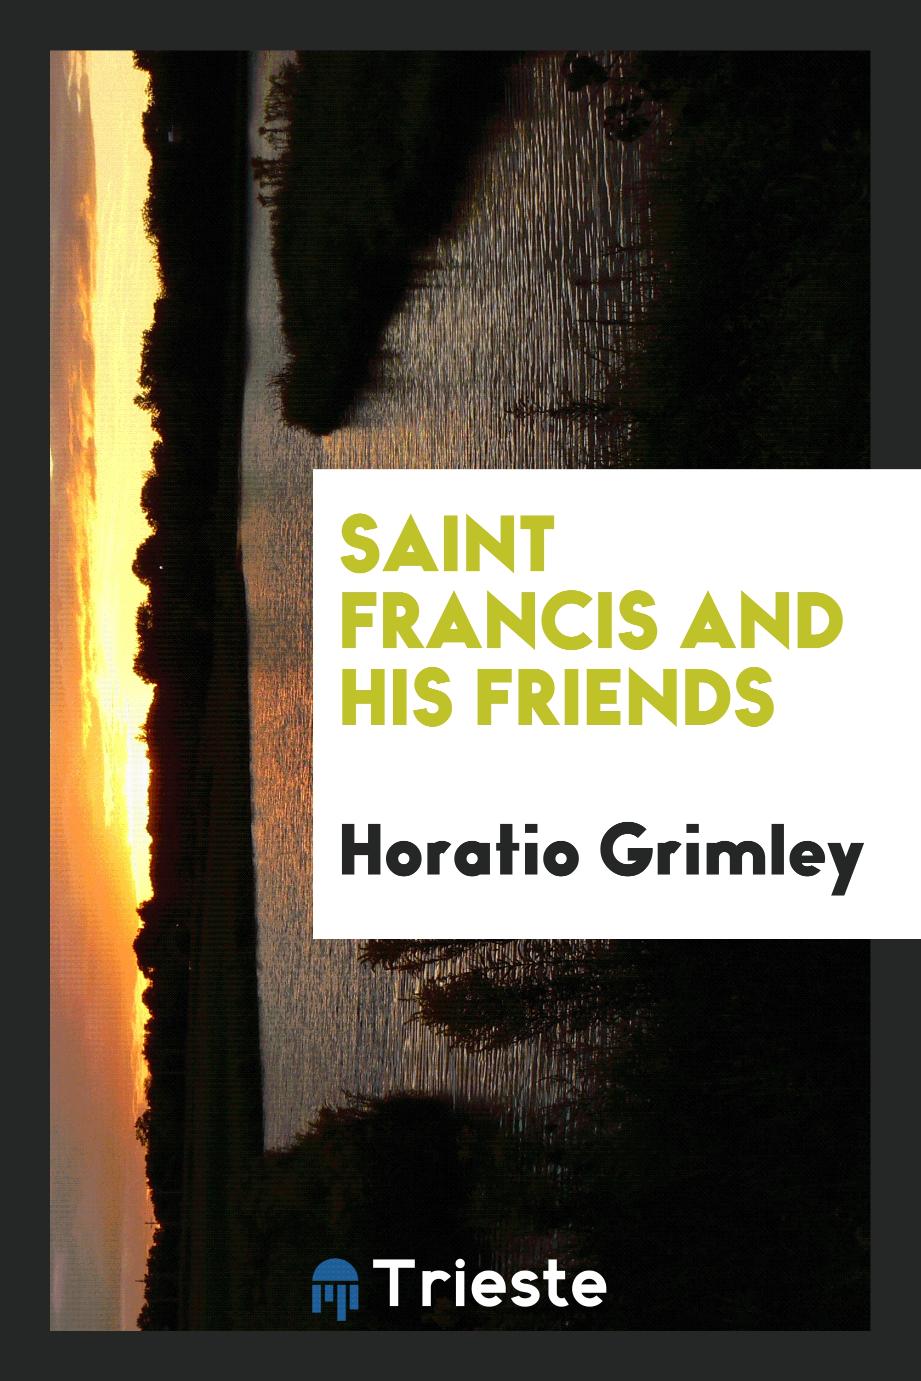 Saint Francis and his friends